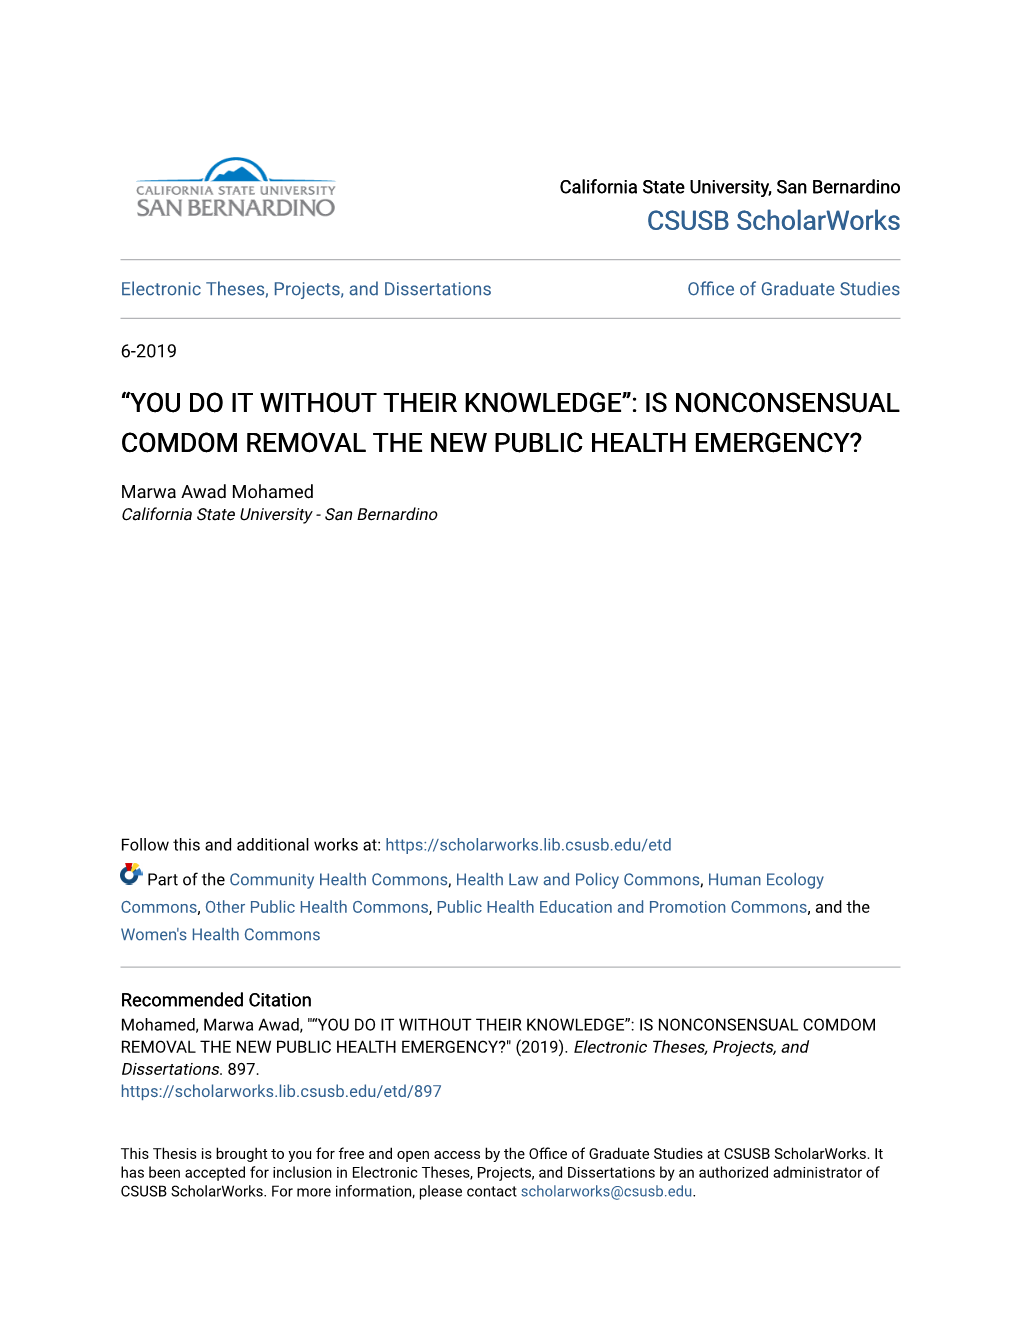 Is Nonconsensual Comdom Removal the New Public Health Emergency?